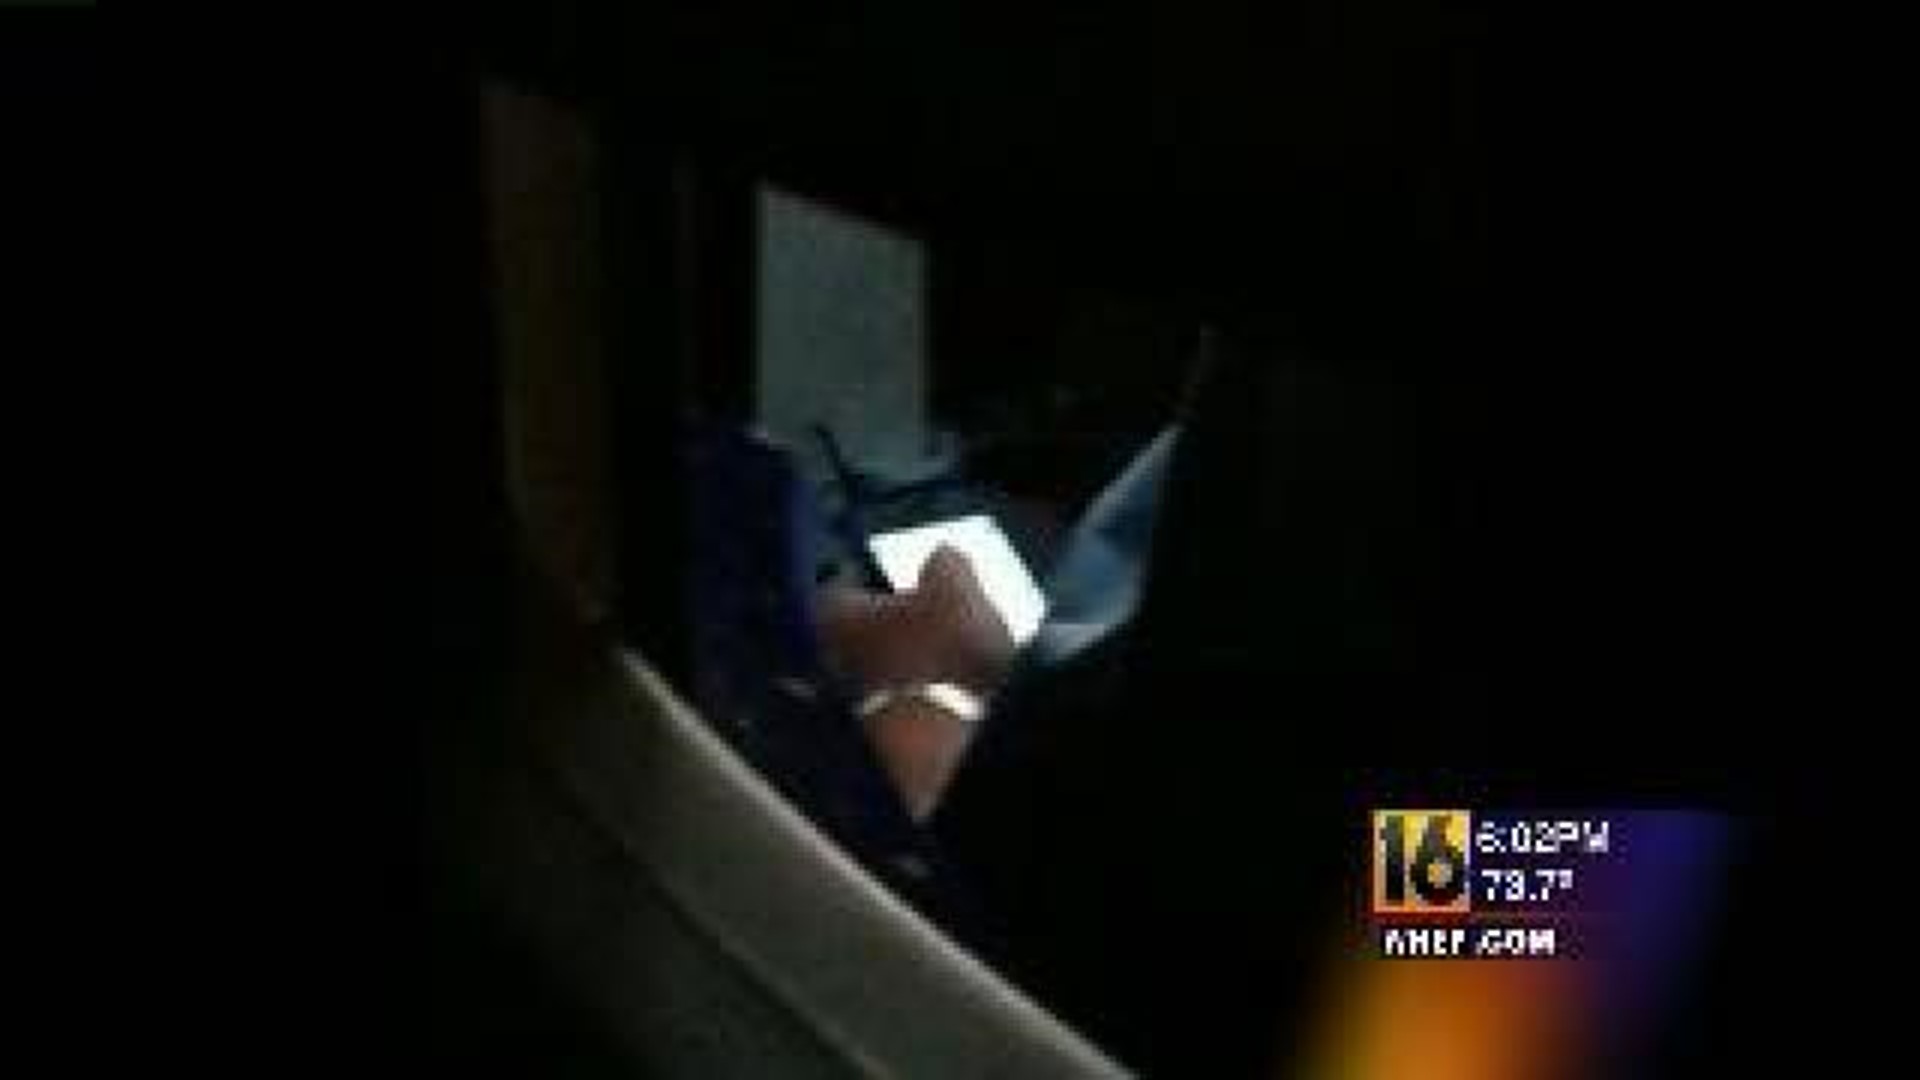 Bus Driver Blunder: Caught Texting While Driving